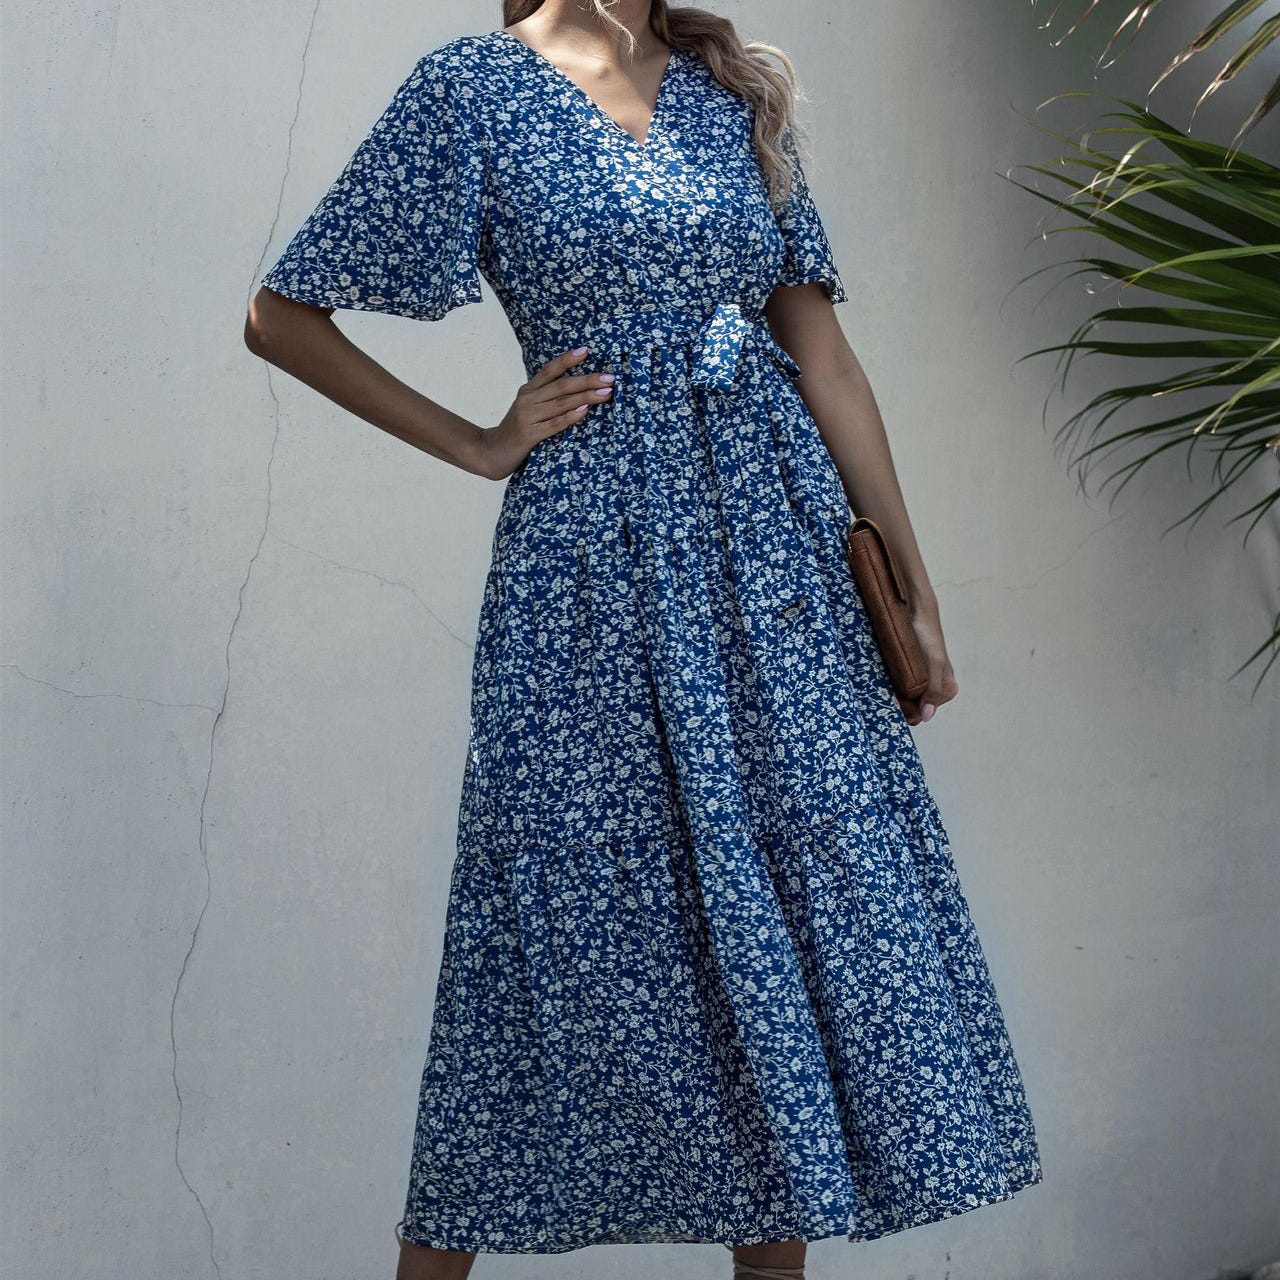 A woman is wearing a blue and white floral print mid-length dress with short sleeves, a V-neckline, and a tied waist.